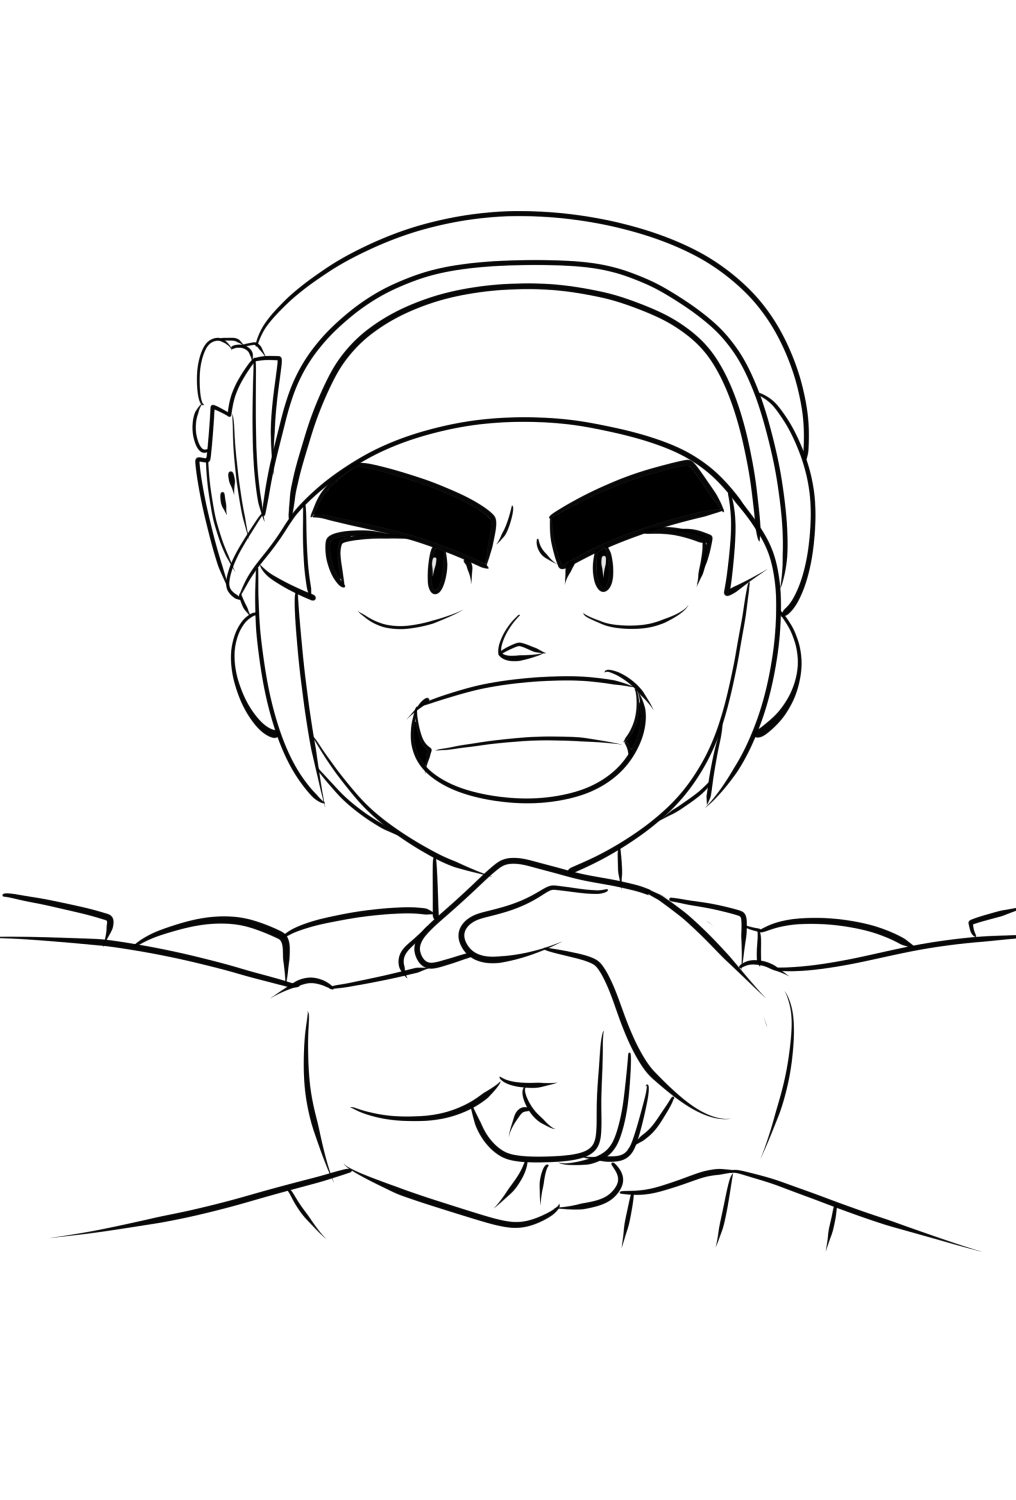 Fang 04 Brawl Stars coloring page to print and coloring